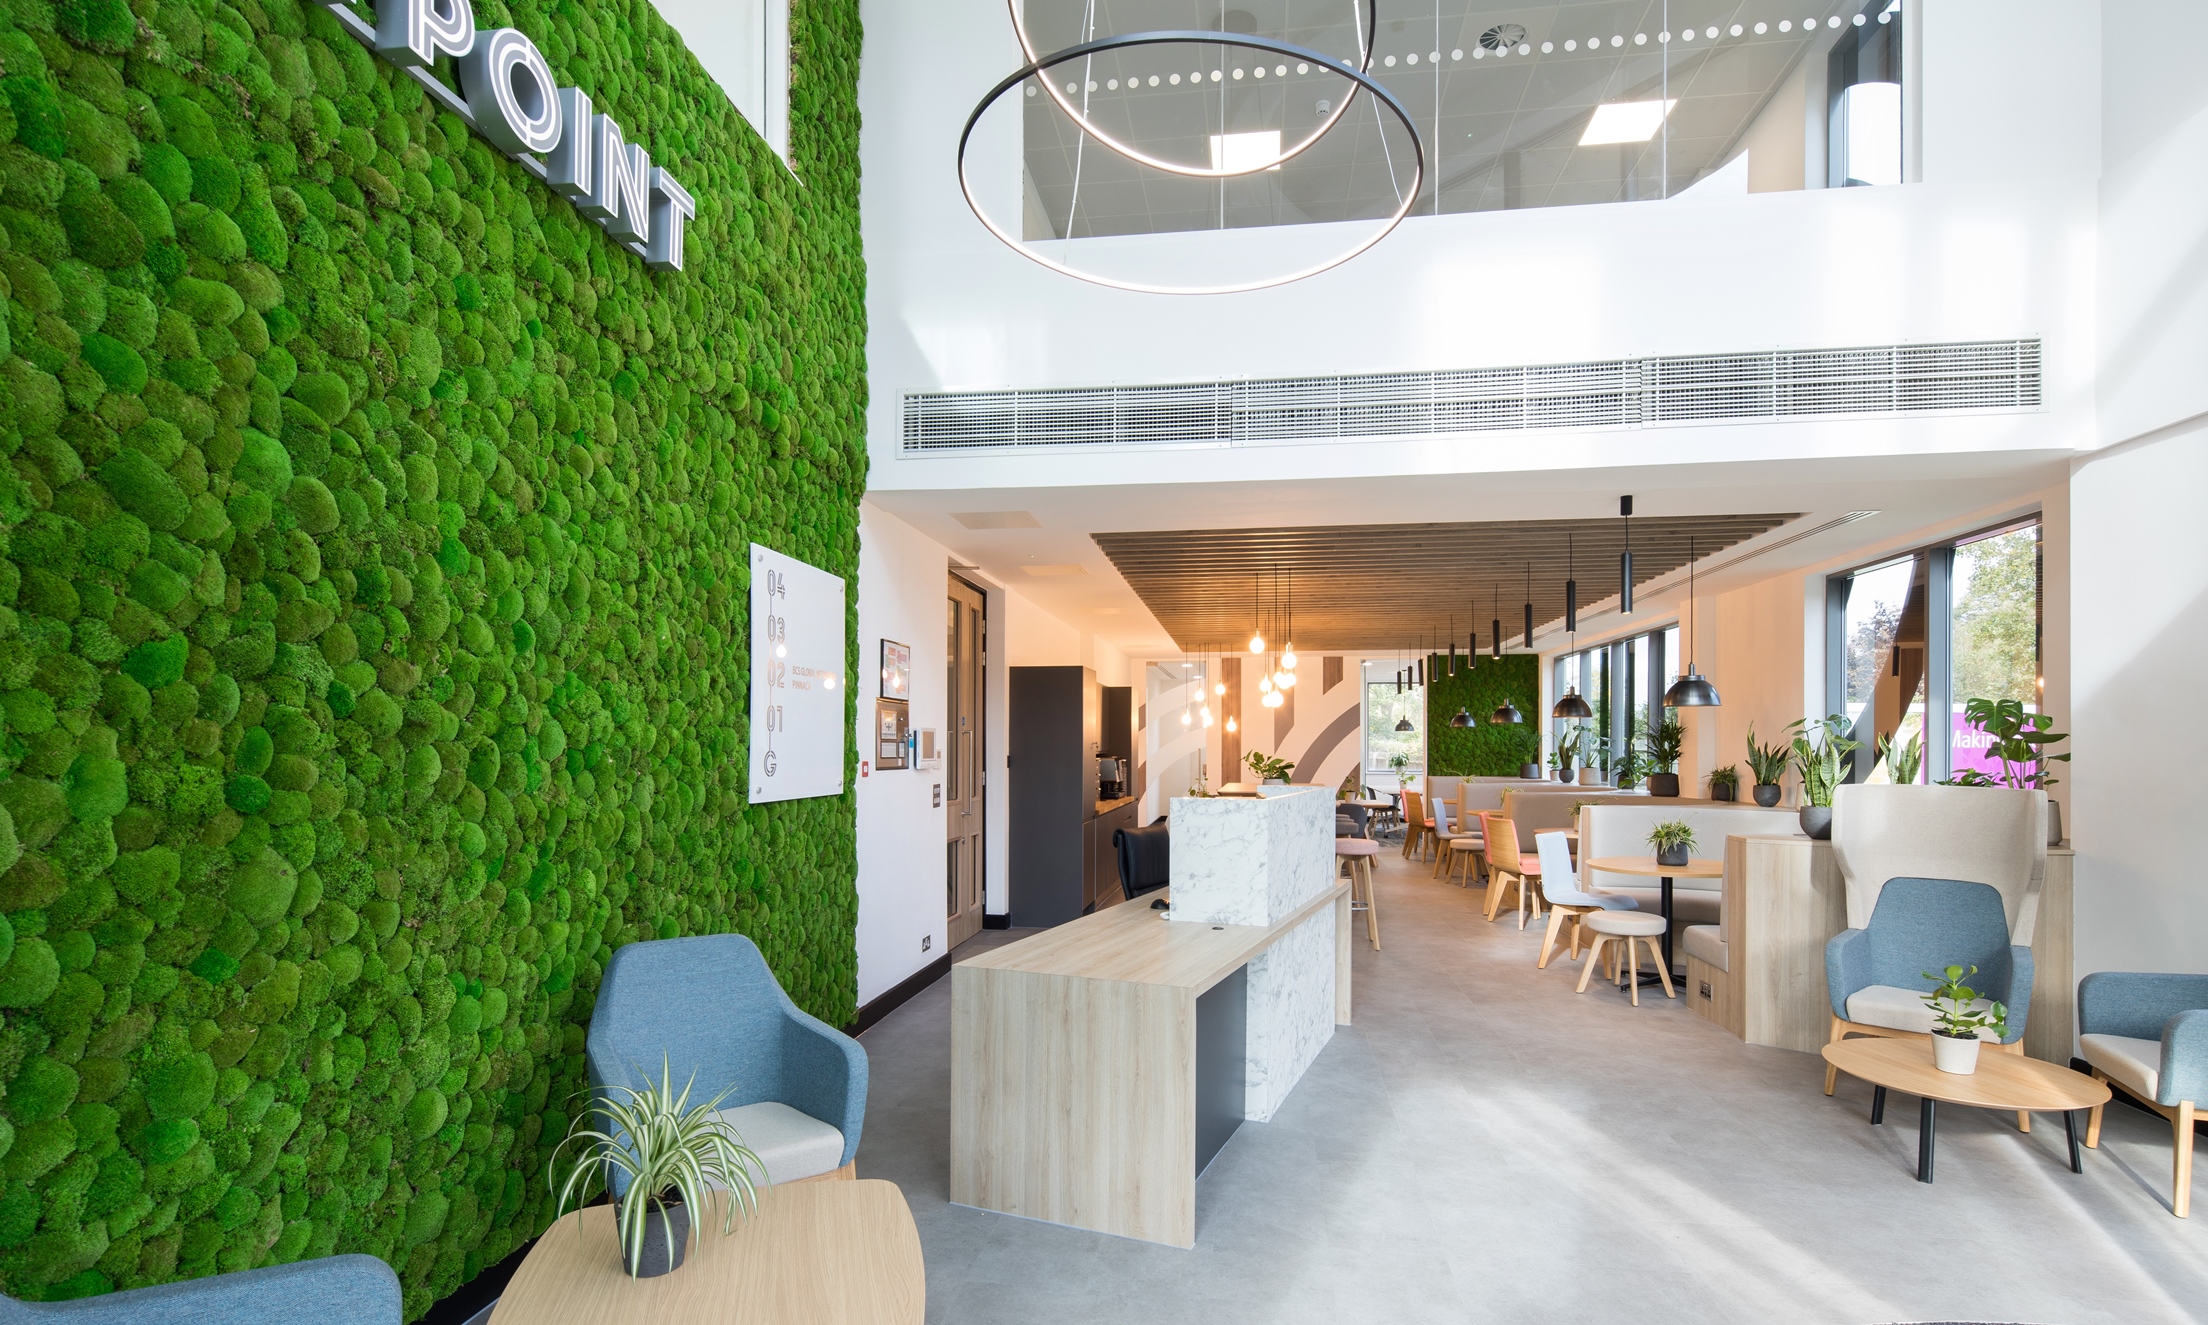 The Biophilic Office: Design Principles & Workplace Examples